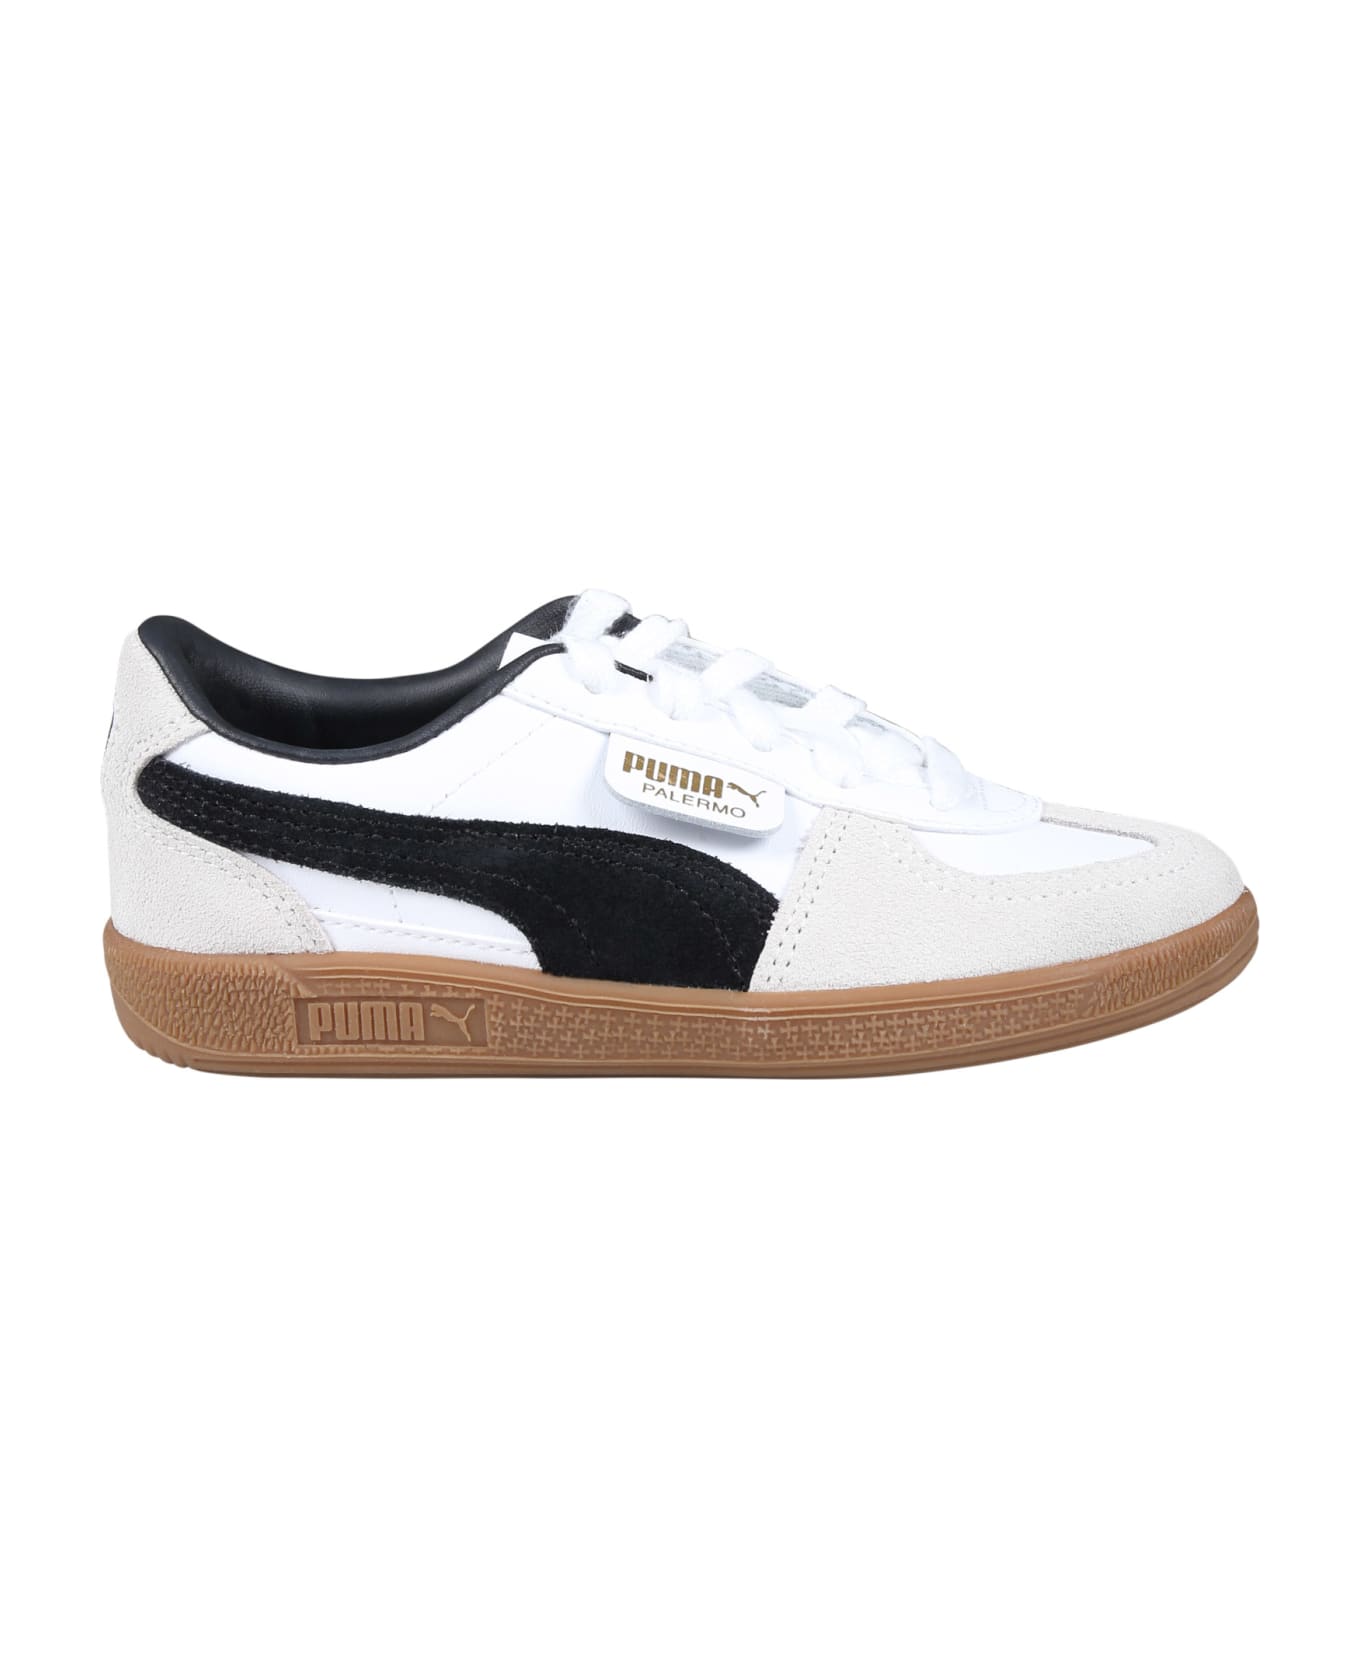 Puma Palermo Ps Light Blue Low Sneakers For Kids - White